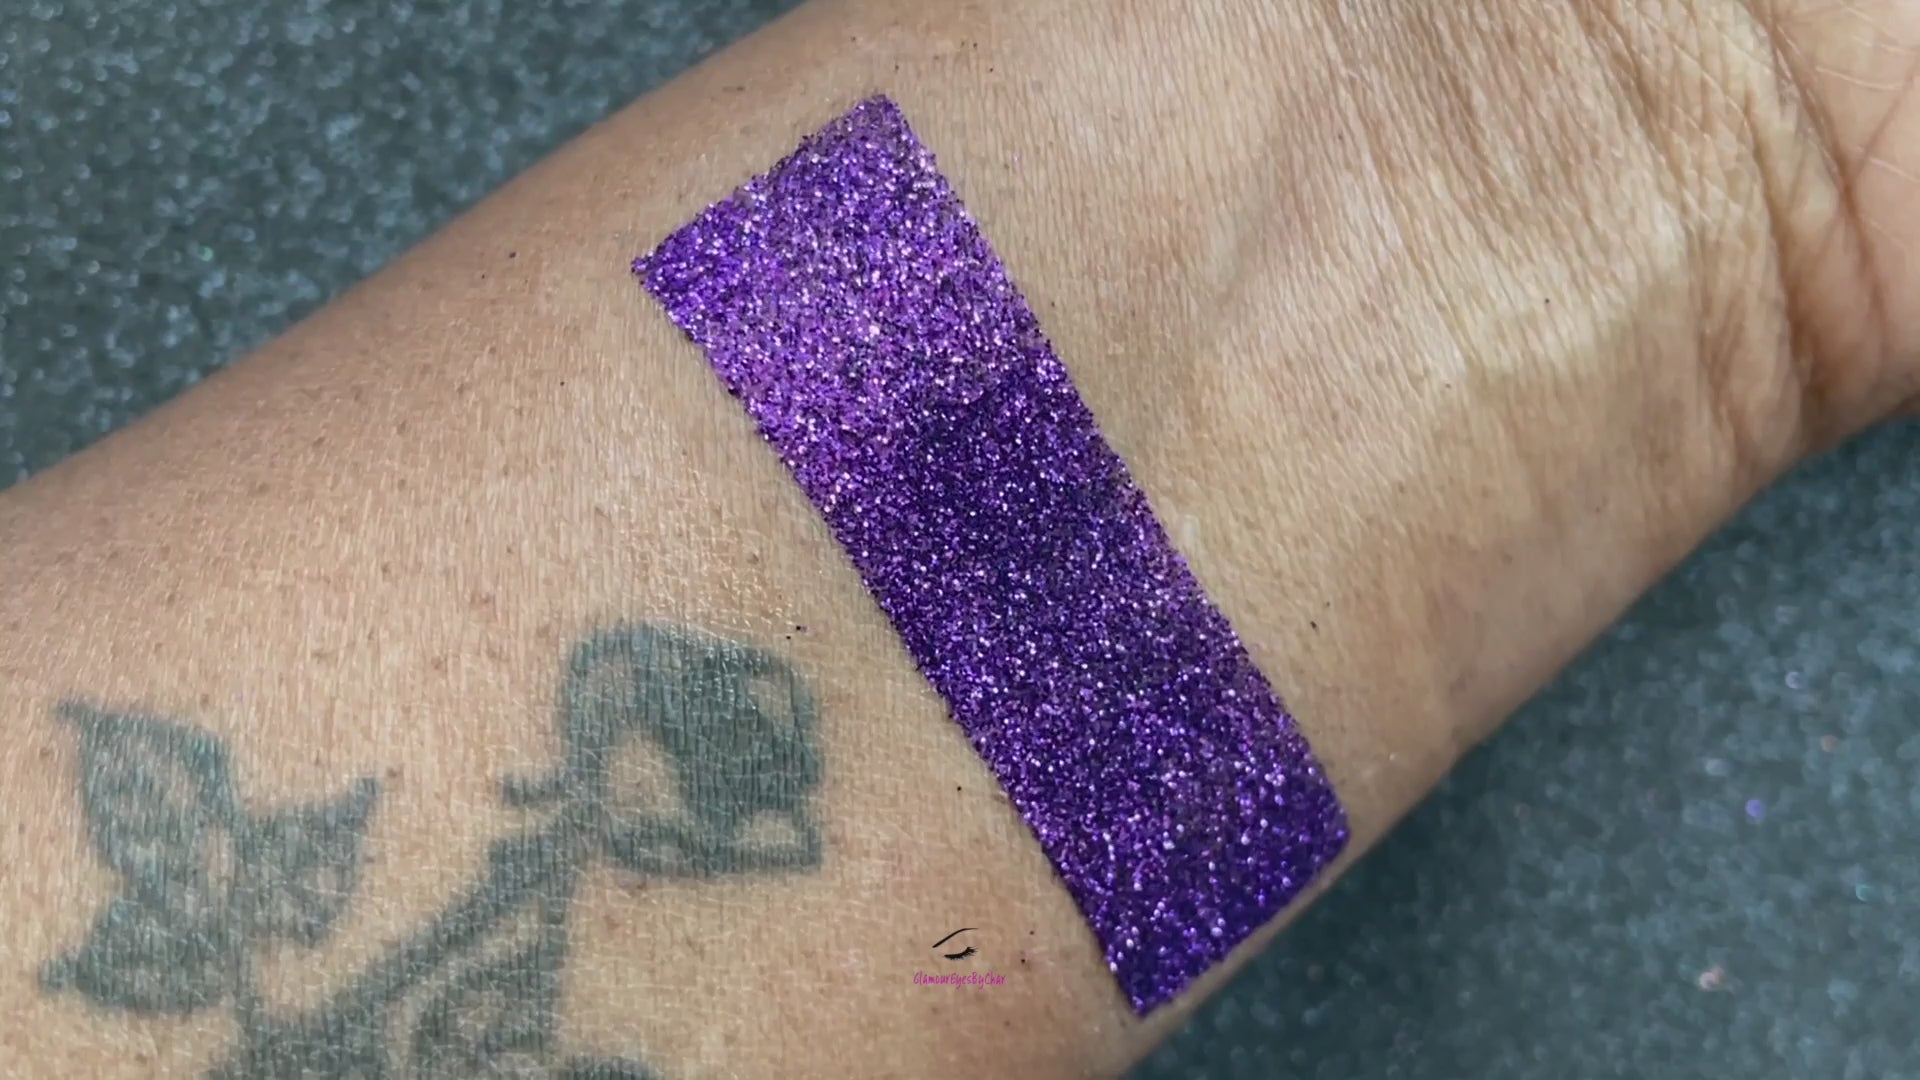 This glitter is part of the simple glitter collection. It consists of royal purple metallic glitter. Purple Crush can be used for your face, hair, body, nail art and glitter slime. Available in 5g jars only.